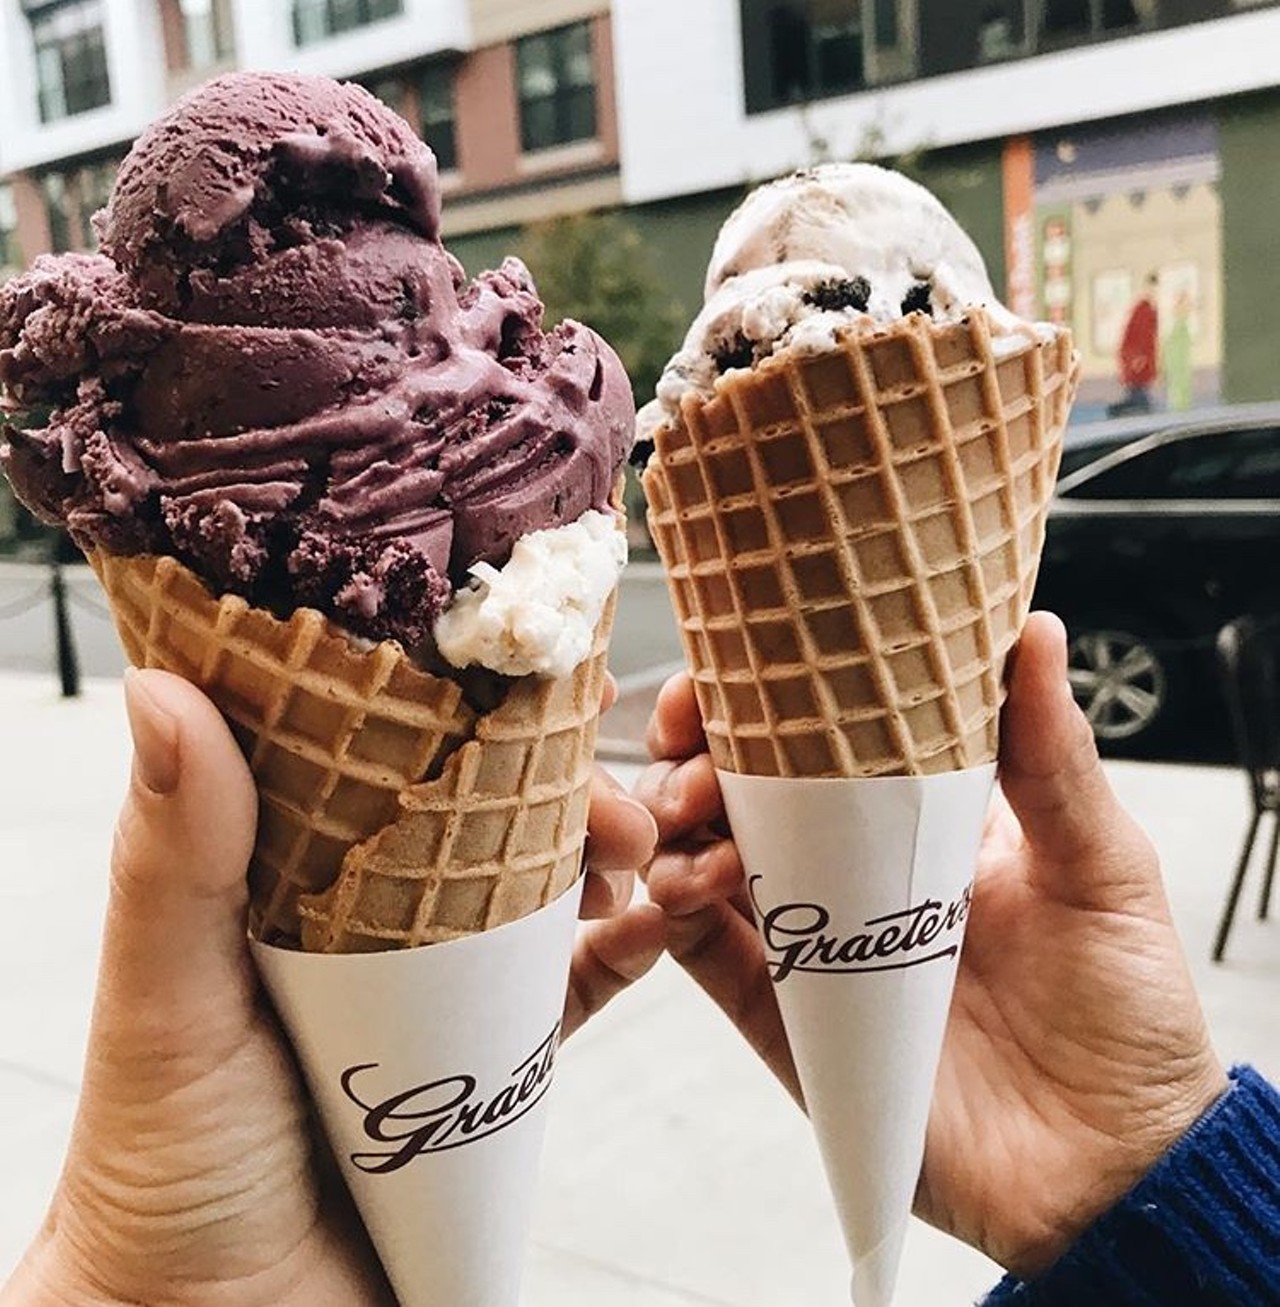 Graeter&#146;s
10 Park Ave. Suite 116, Beachwood and 261 Main St., Westlake
Yeah, it may be a Cincinnati thing, but Graeter&#146;s is so delicious that we have to include it here. Known for their giant chocolate chunks in their ice cream, we&#146;re glad they came to town. 
Photo via Clevelandvibes/Instagram